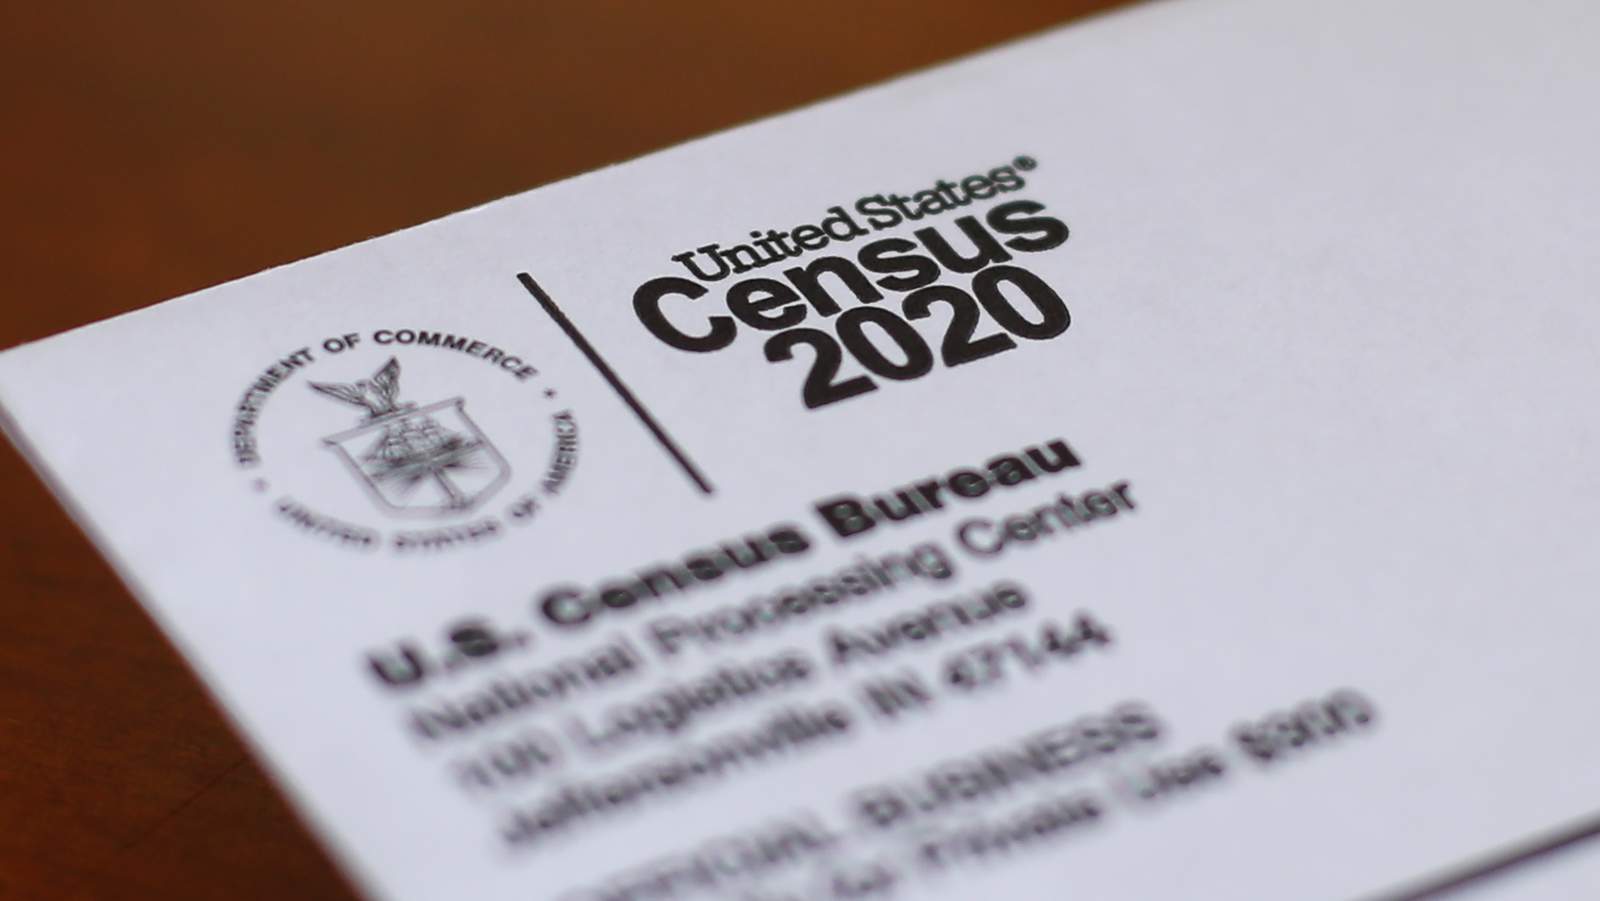 Trump asks Supreme Court for fast action in census case